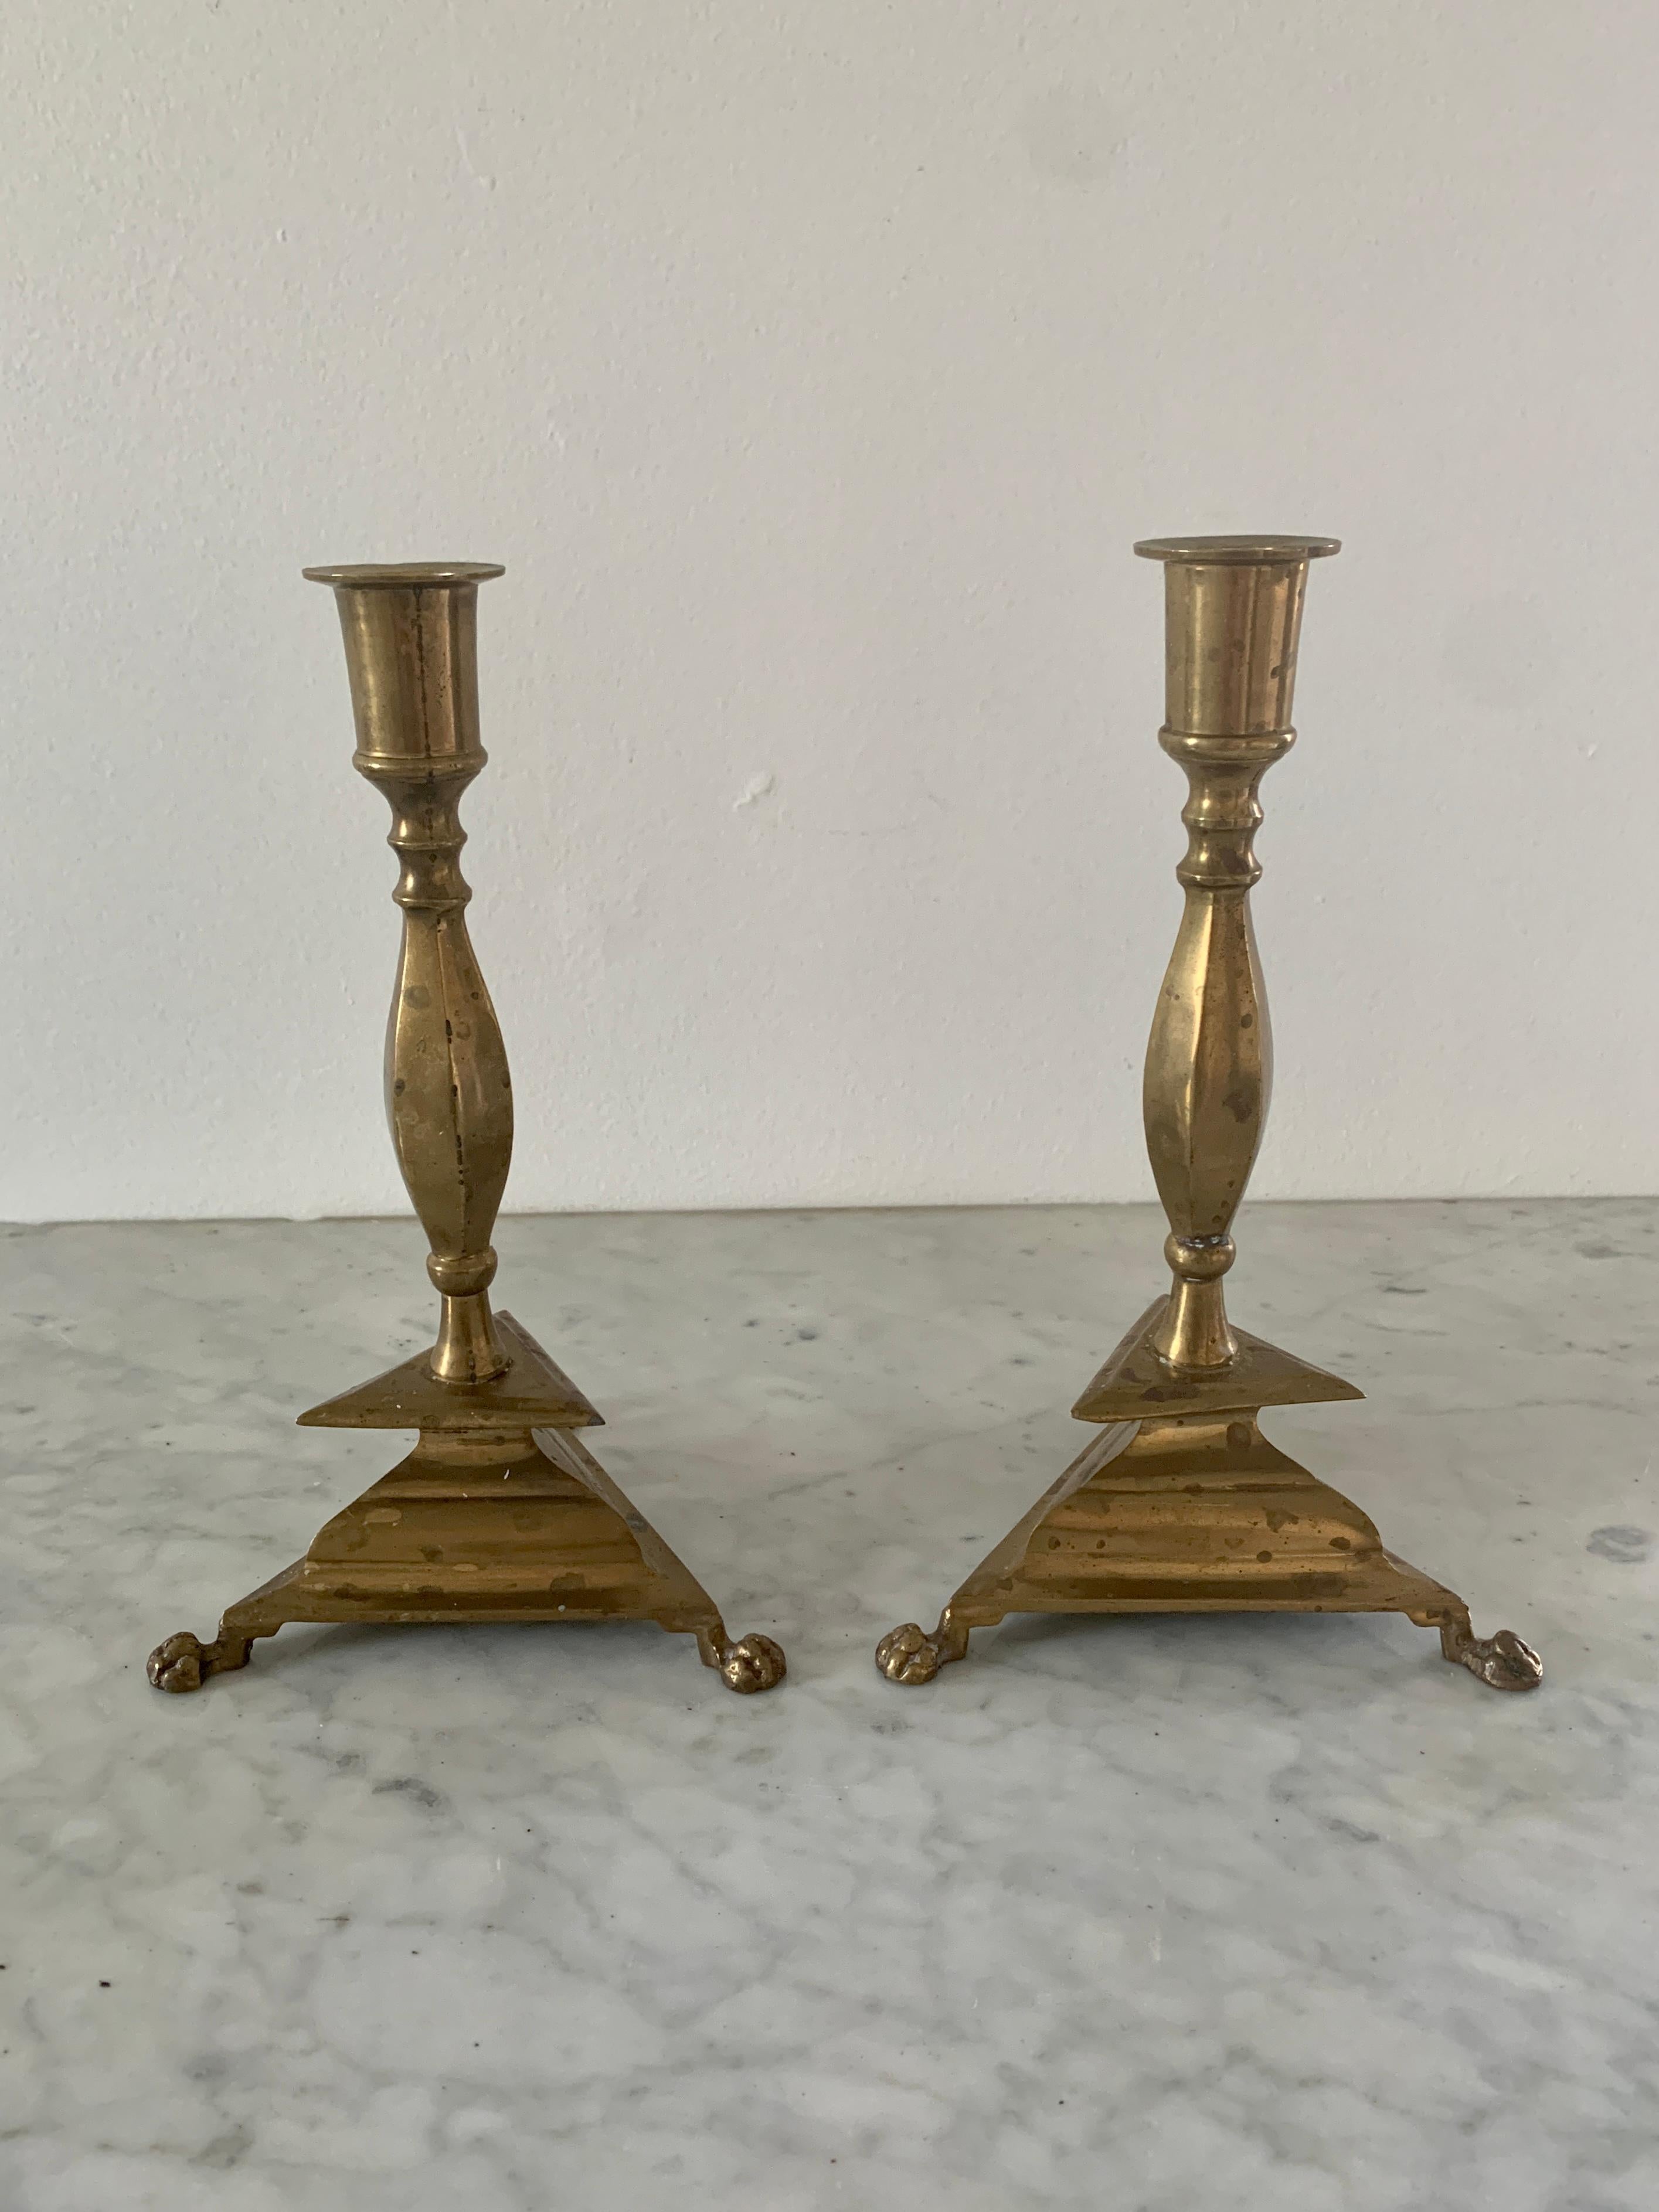 20th Century Neoclassical Brass Paw Foot Candlestick Holders, Pair For Sale